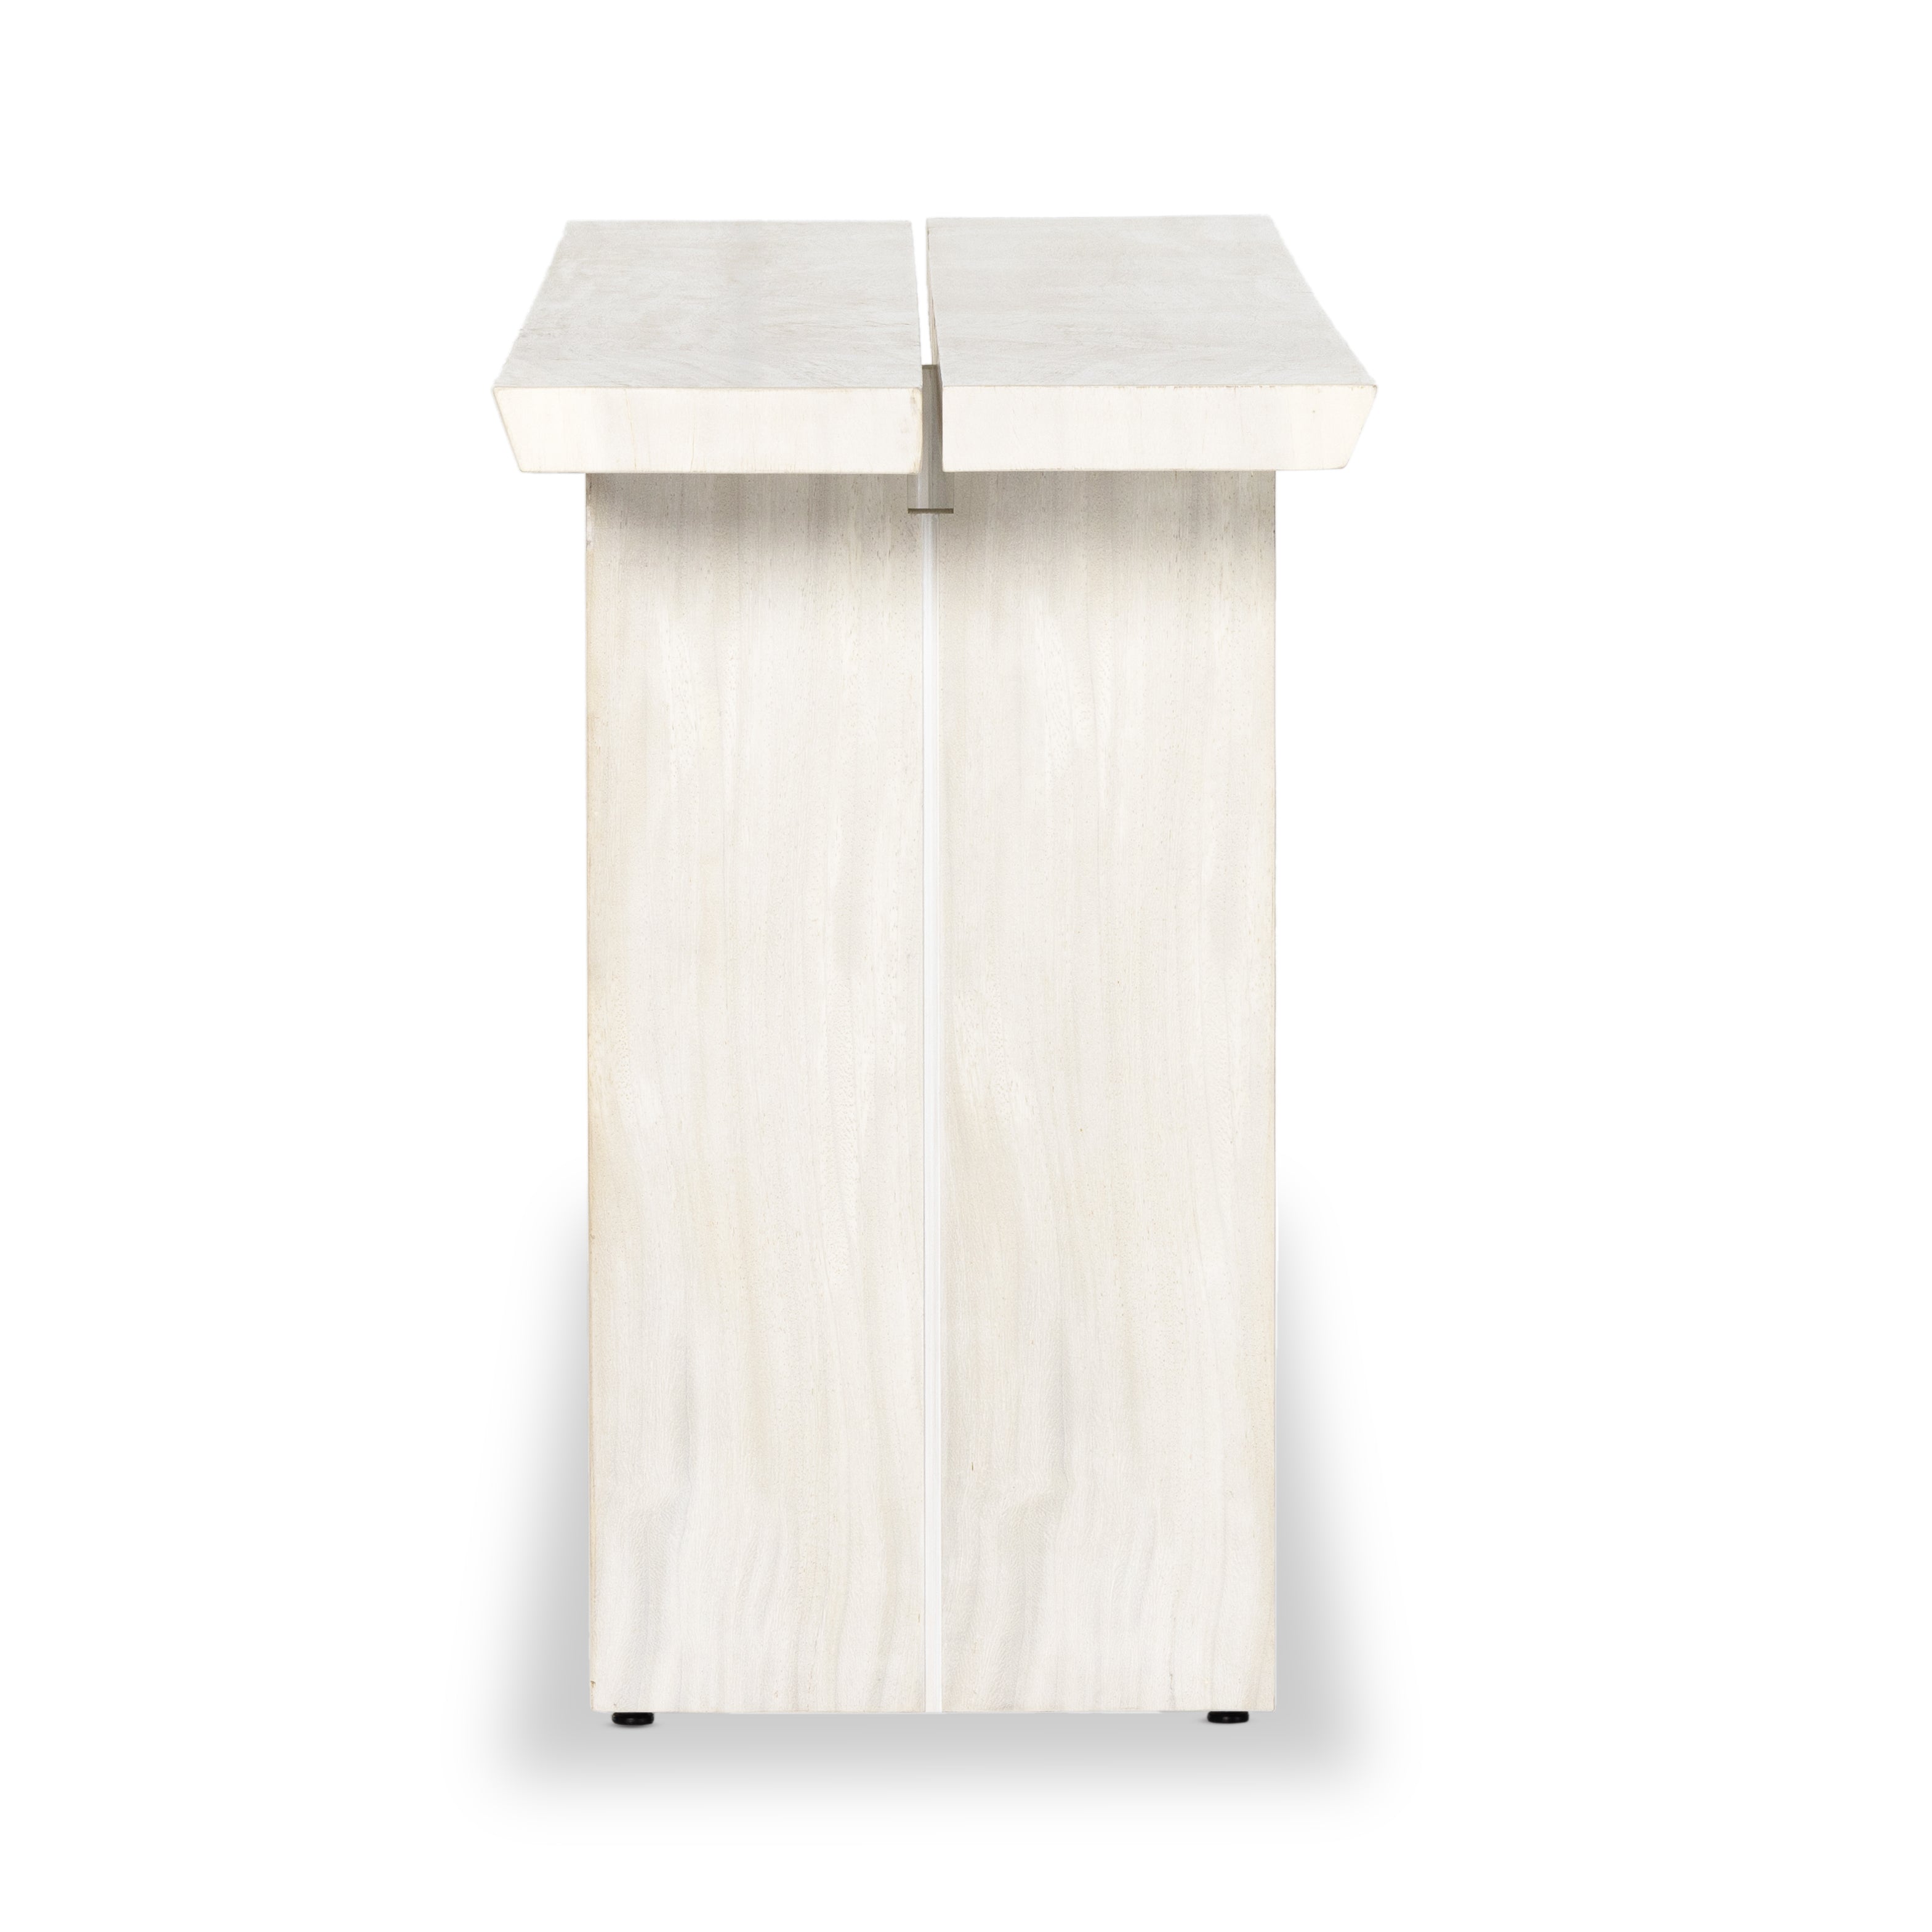 Made from bleached Guanacaste, a minimalist console table features live edging and split slab detailing. Light in look and finish, for versatility in any space or style. Amethyst Home provides interior design, new construction, custom furniture and area rugs in the Kansas City metro area